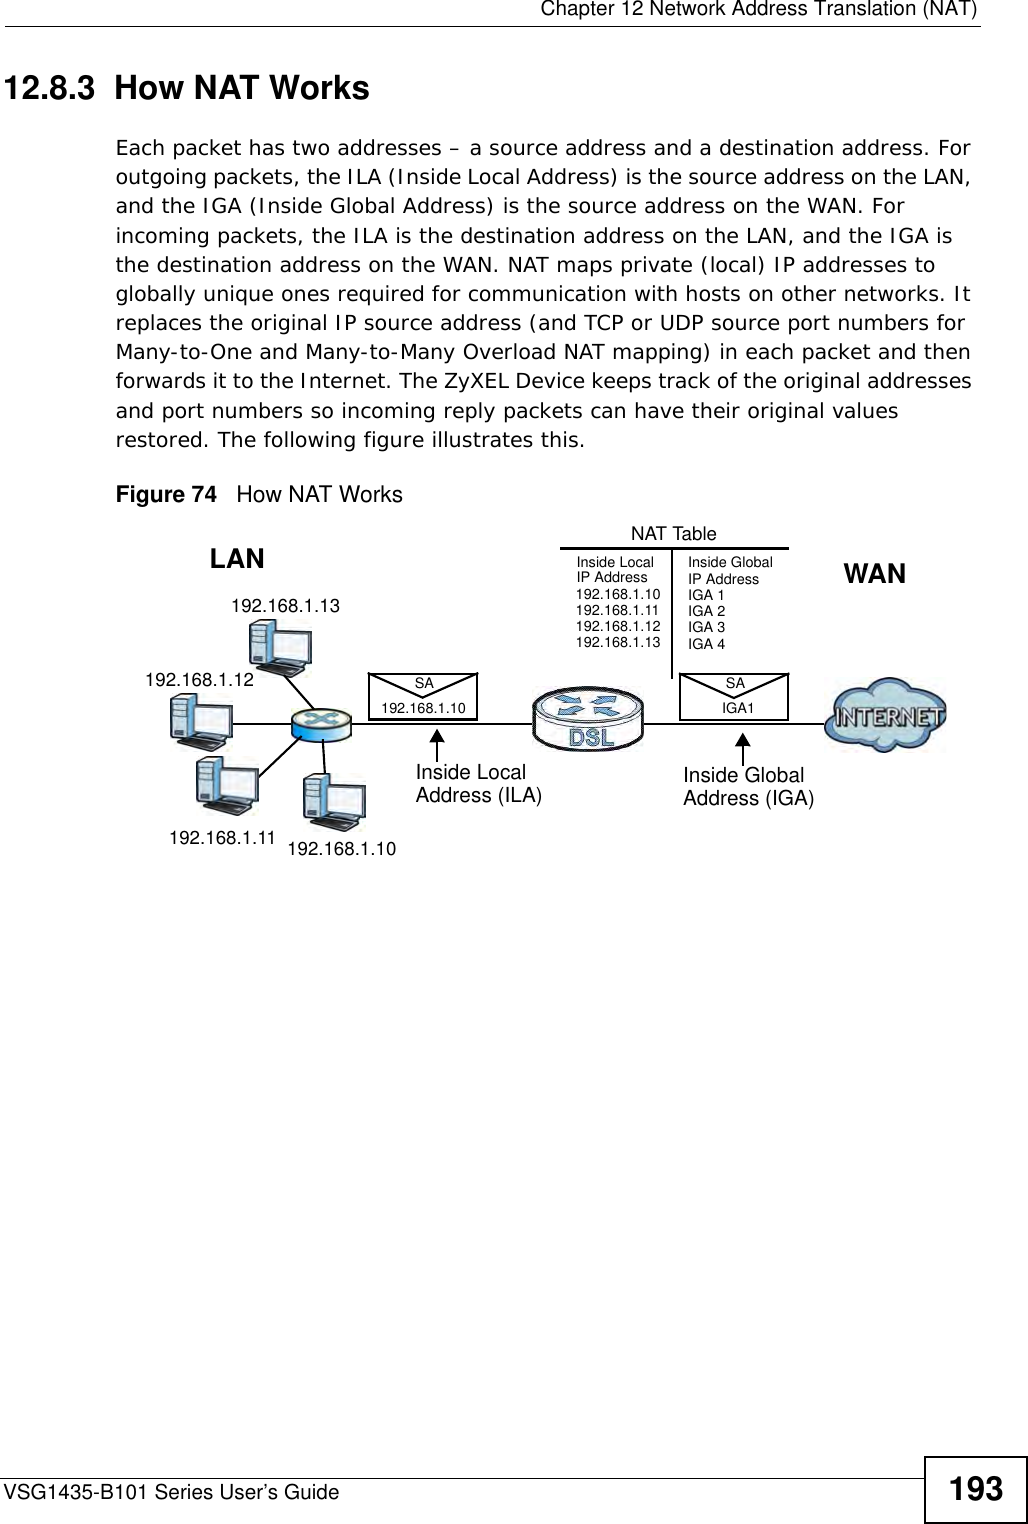  Chapter 12 Network Address Translation (NAT)VSG1435-B101 Series User’s Guide 19312.8.3  How NAT WorksEach packet has two addresses – a source address and a destination address. For outgoing packets, the ILA (Inside Local Address) is the source address on the LAN, and the IGA (Inside Global Address) is the source address on the WAN. For incoming packets, the ILA is the destination address on the LAN, and the IGA is the destination address on the WAN. NAT maps private (local) IP addresses to globally unique ones required for communication with hosts on other networks. It replaces the original IP source address (and TCP or UDP source port numbers for Many-to-One and Many-to-Many Overload NAT mapping) in each packet and then forwards it to the Internet. The ZyXEL Device keeps track of the original addresses and port numbers so incoming reply packets can have their original values restored. The following figure illustrates this.Figure 74   How NAT Works192.168.1.13192.168.1.10192.168.1.11192.168.1.12 SA192.168.1.10SAIGA1Inside LocalIP Address192.168.1.10192.168.1.11192.168.1.12192.168.1.13Inside Global IP AddressIGA 1IGA 2IGA 3IGA 4NAT TableWANLANInside LocalAddress (ILA) Inside GlobalAddress (IGA)